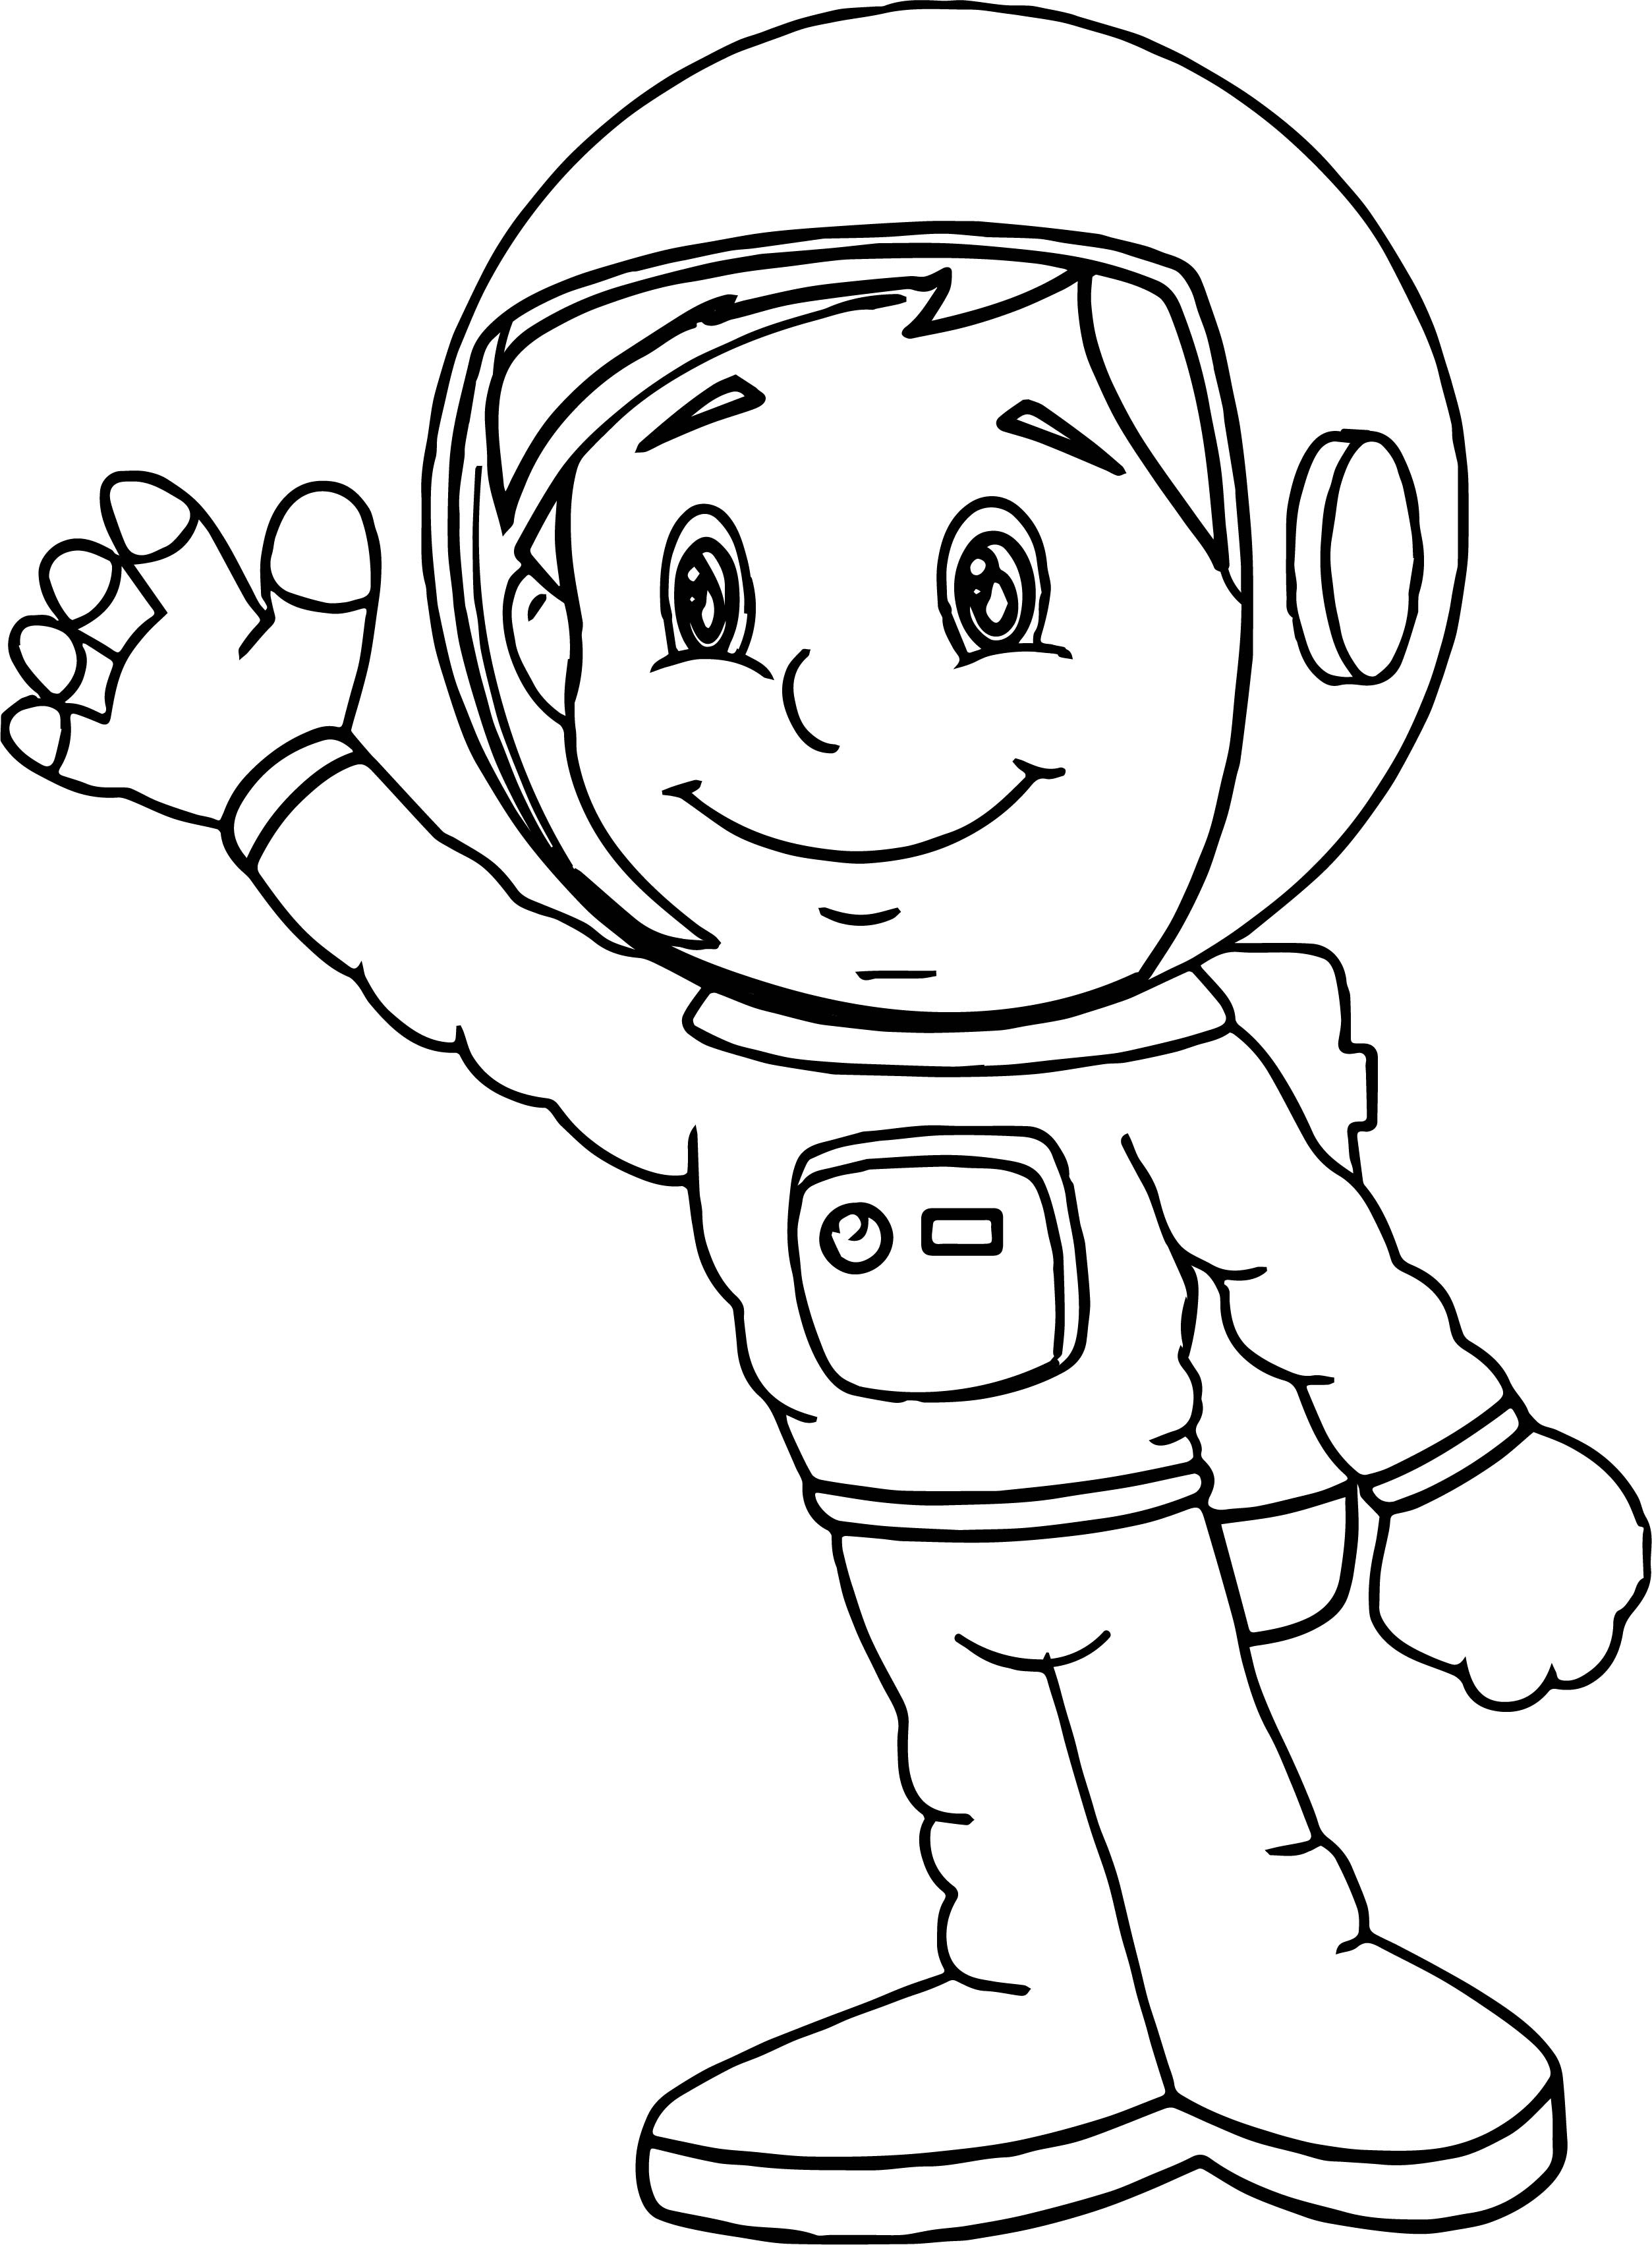 astronaut-drawing-at-getdrawings-free-download